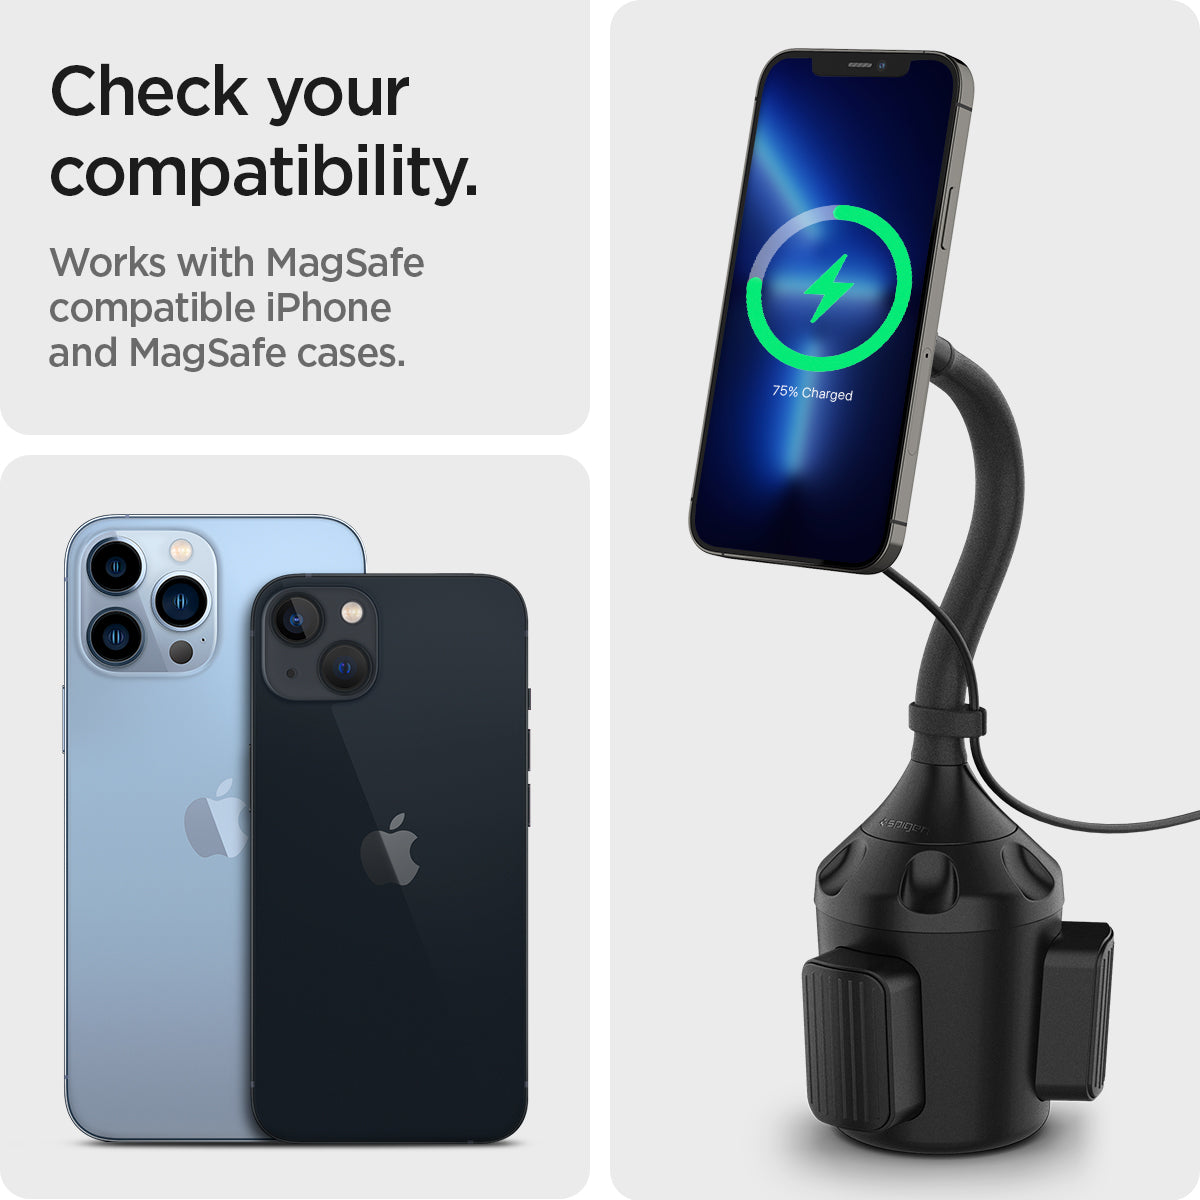 ACP03810 - OneTap Pro Cup Holder Car Mount ITS68W (MagFit) in Black showing the Check your compatibility. Works with Magsafe compatible iPhone and MagSafe cases. 2 devices and a device attached to a cup holder car mount